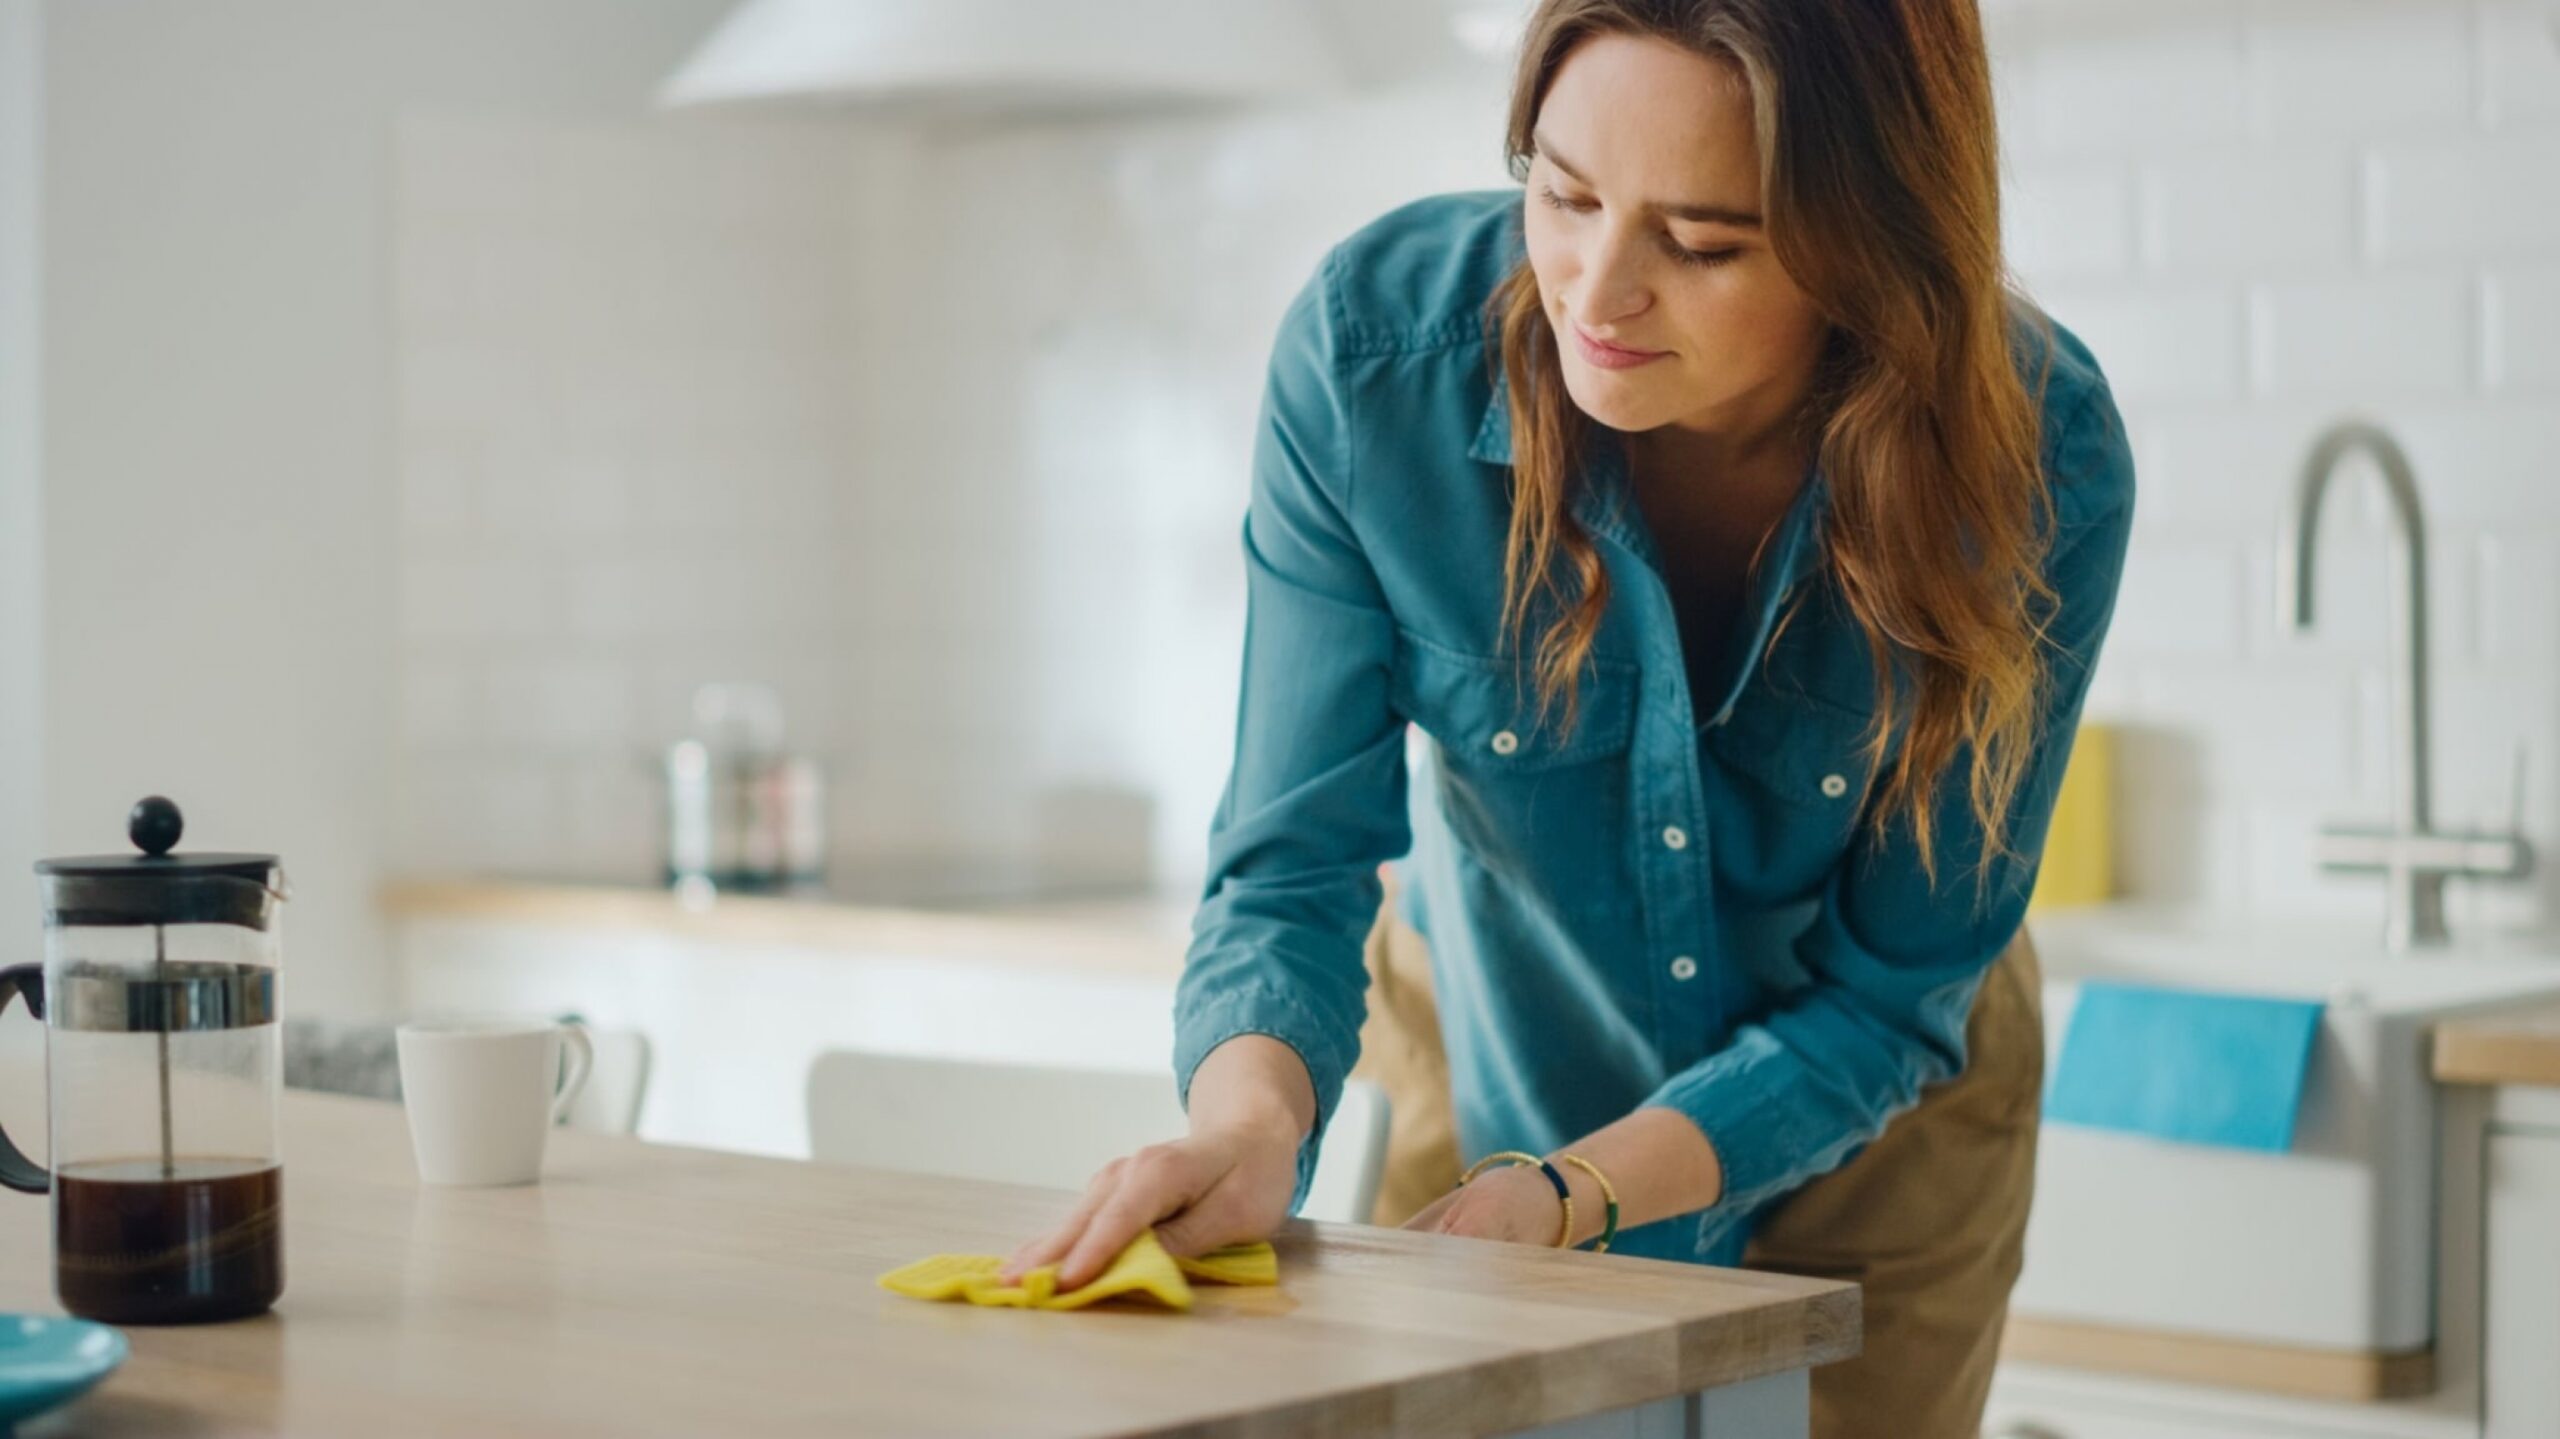 Caring Housewife Wiping Spilled Coffee or Crumbs from a Wooden Kitchen Table.